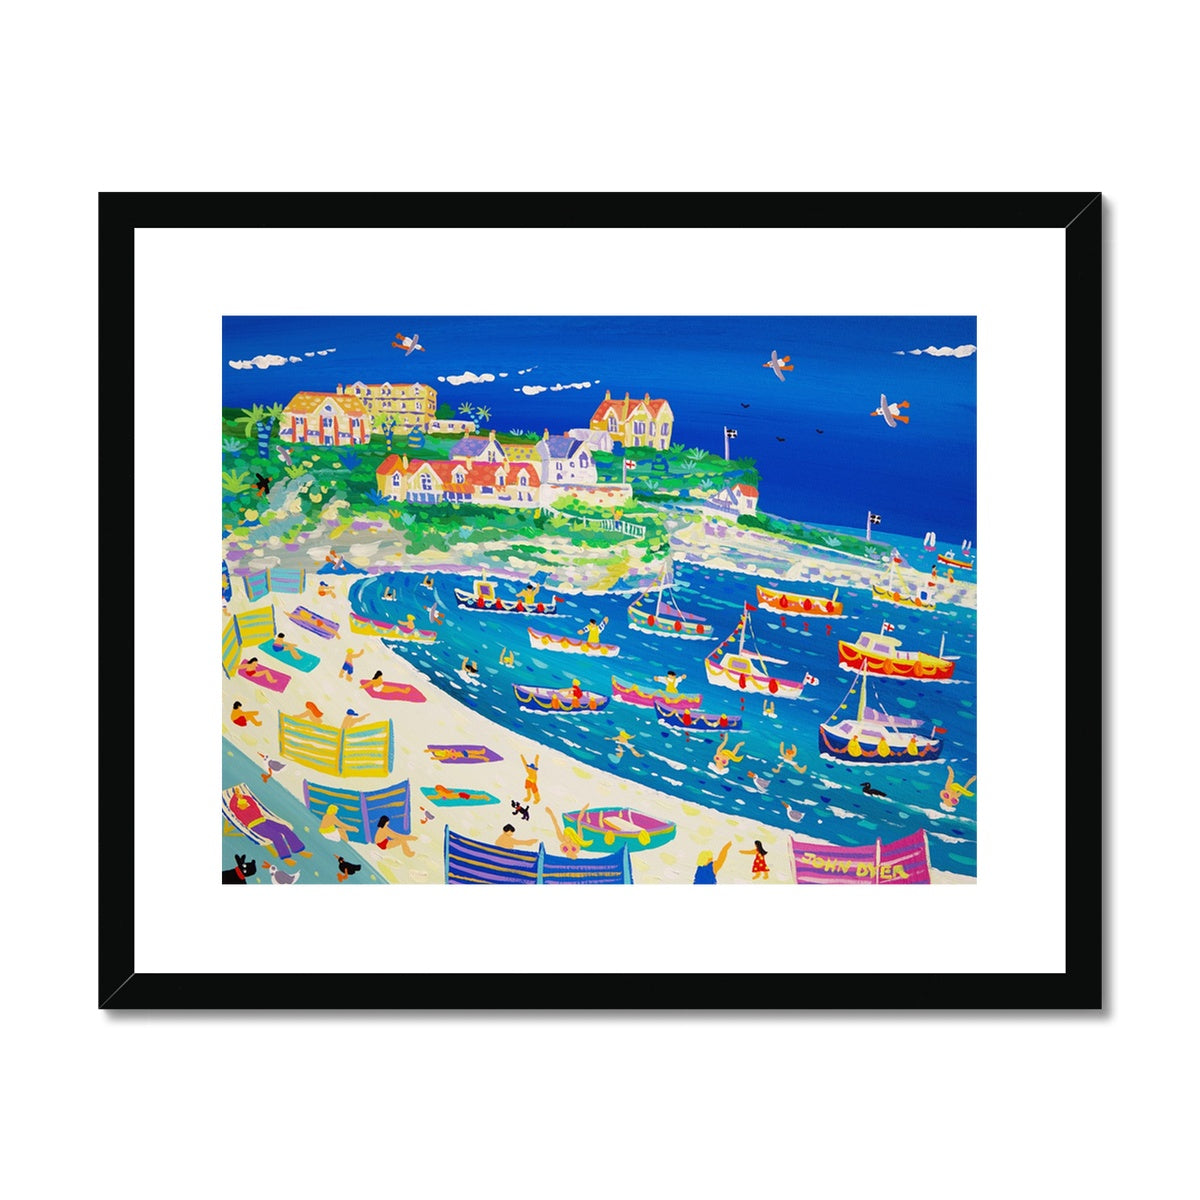 John Dyer Framed Open Edition Cornish Fine Art Print. 'Fun in the Harbour, Newquay'. Cornwall Art Gallery